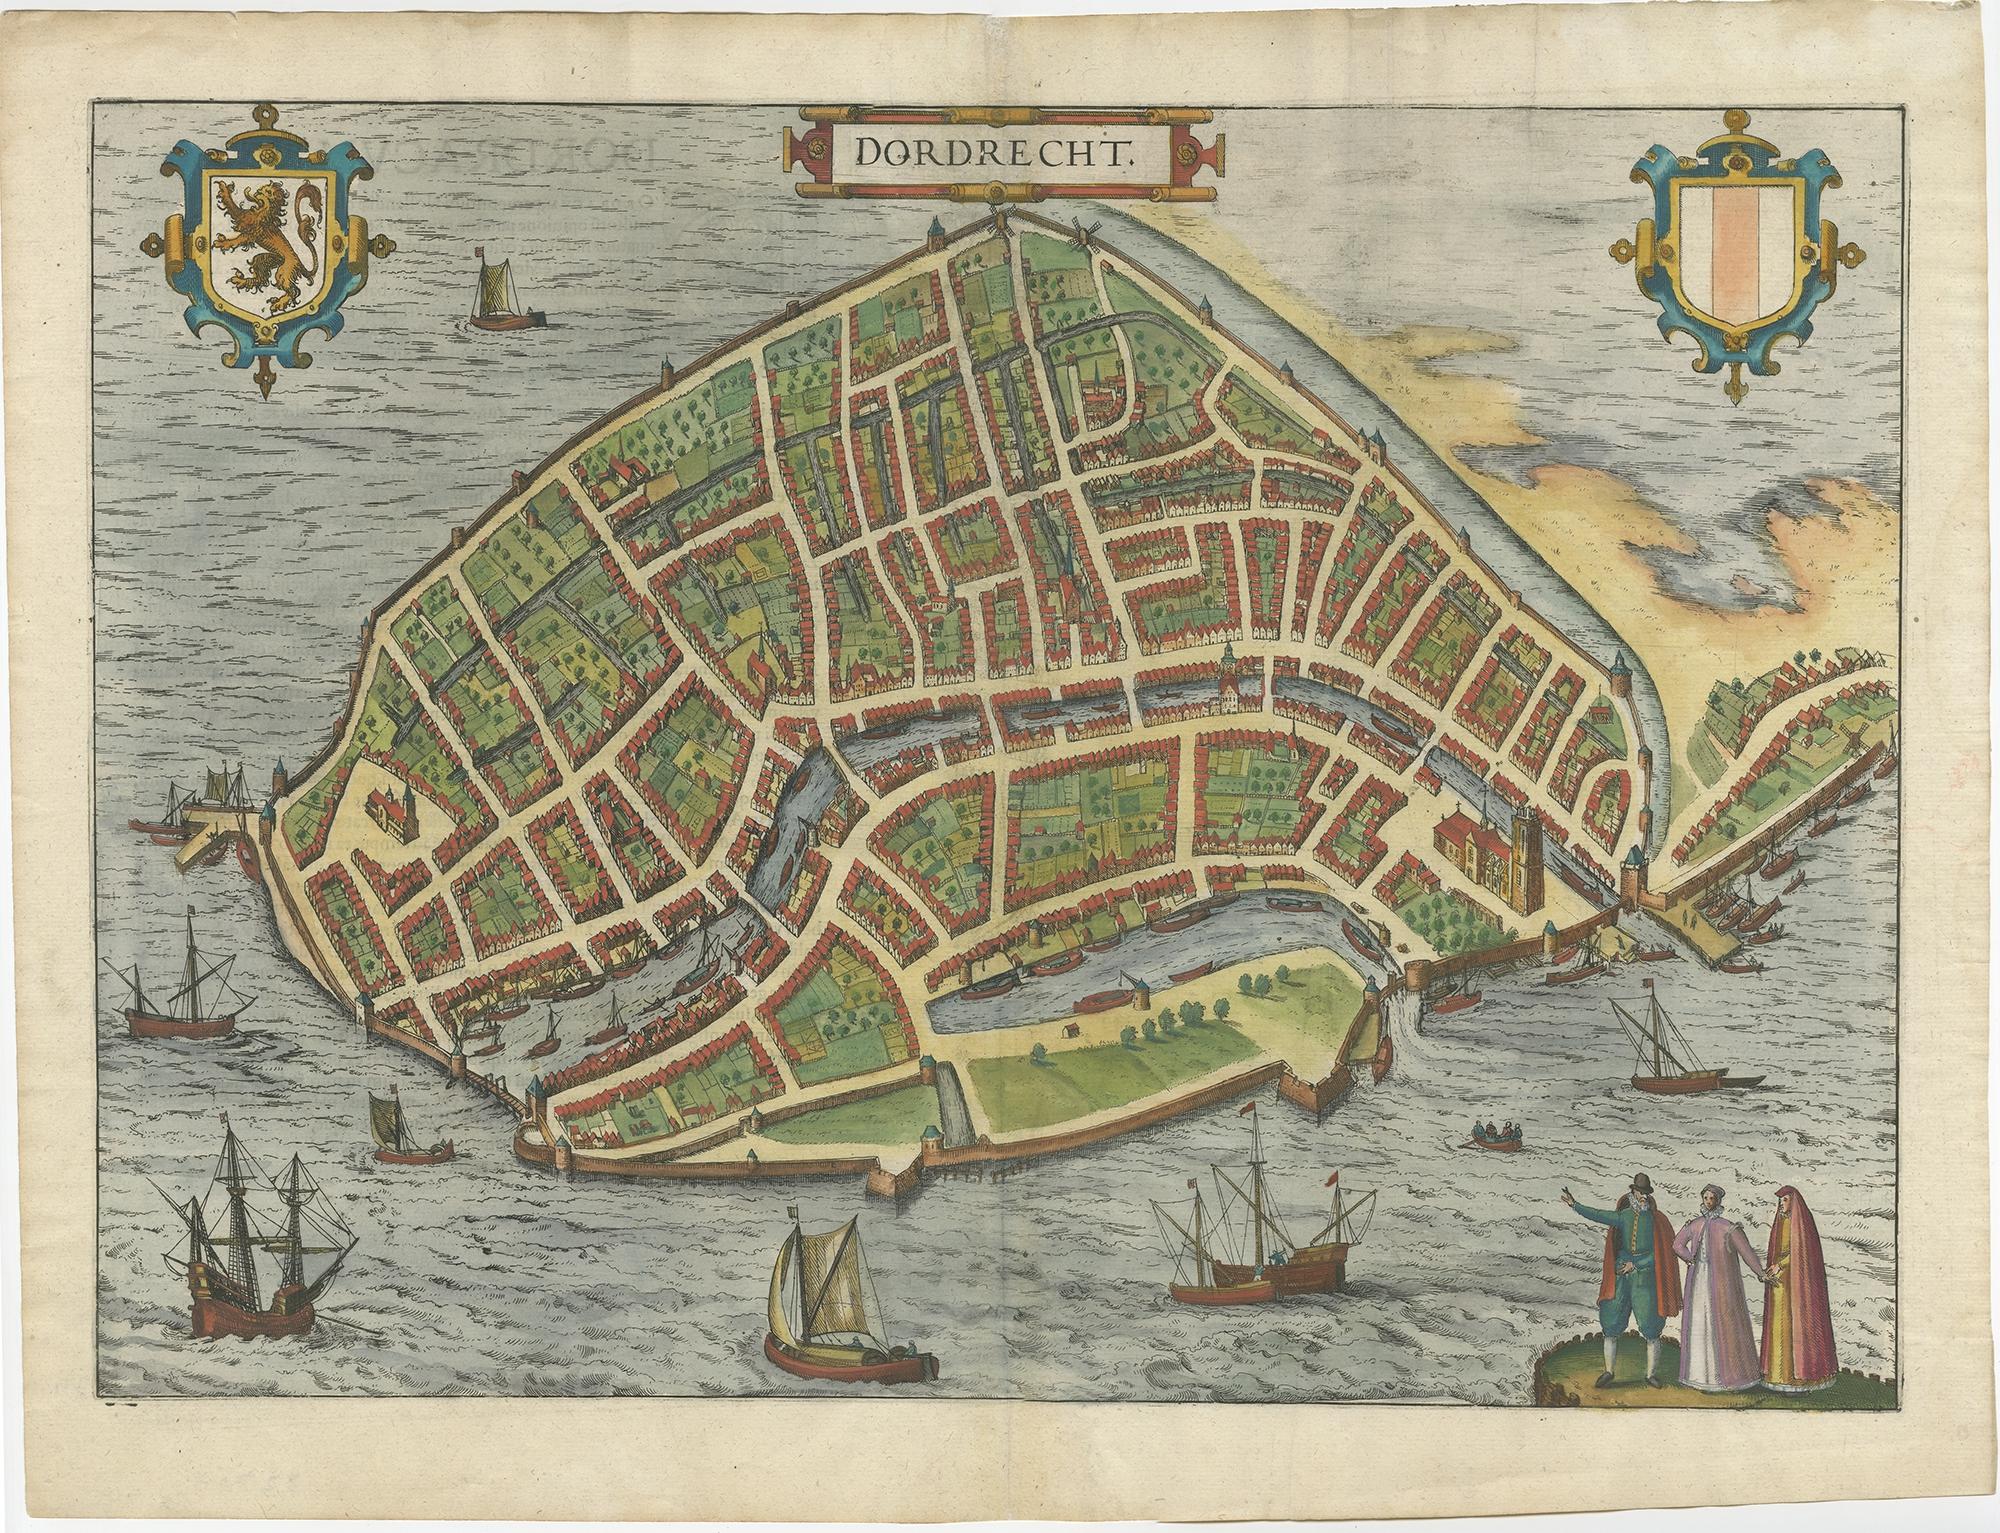 Antique map titled 'Dordrecht'. 

Map of the city of Dordrecht, the Netherlands. Bird's-eye plan view of the city, with many ships and two coats of arms in upper corners. This map originates from 'Civitates Orbis Terrarum' by Braun &